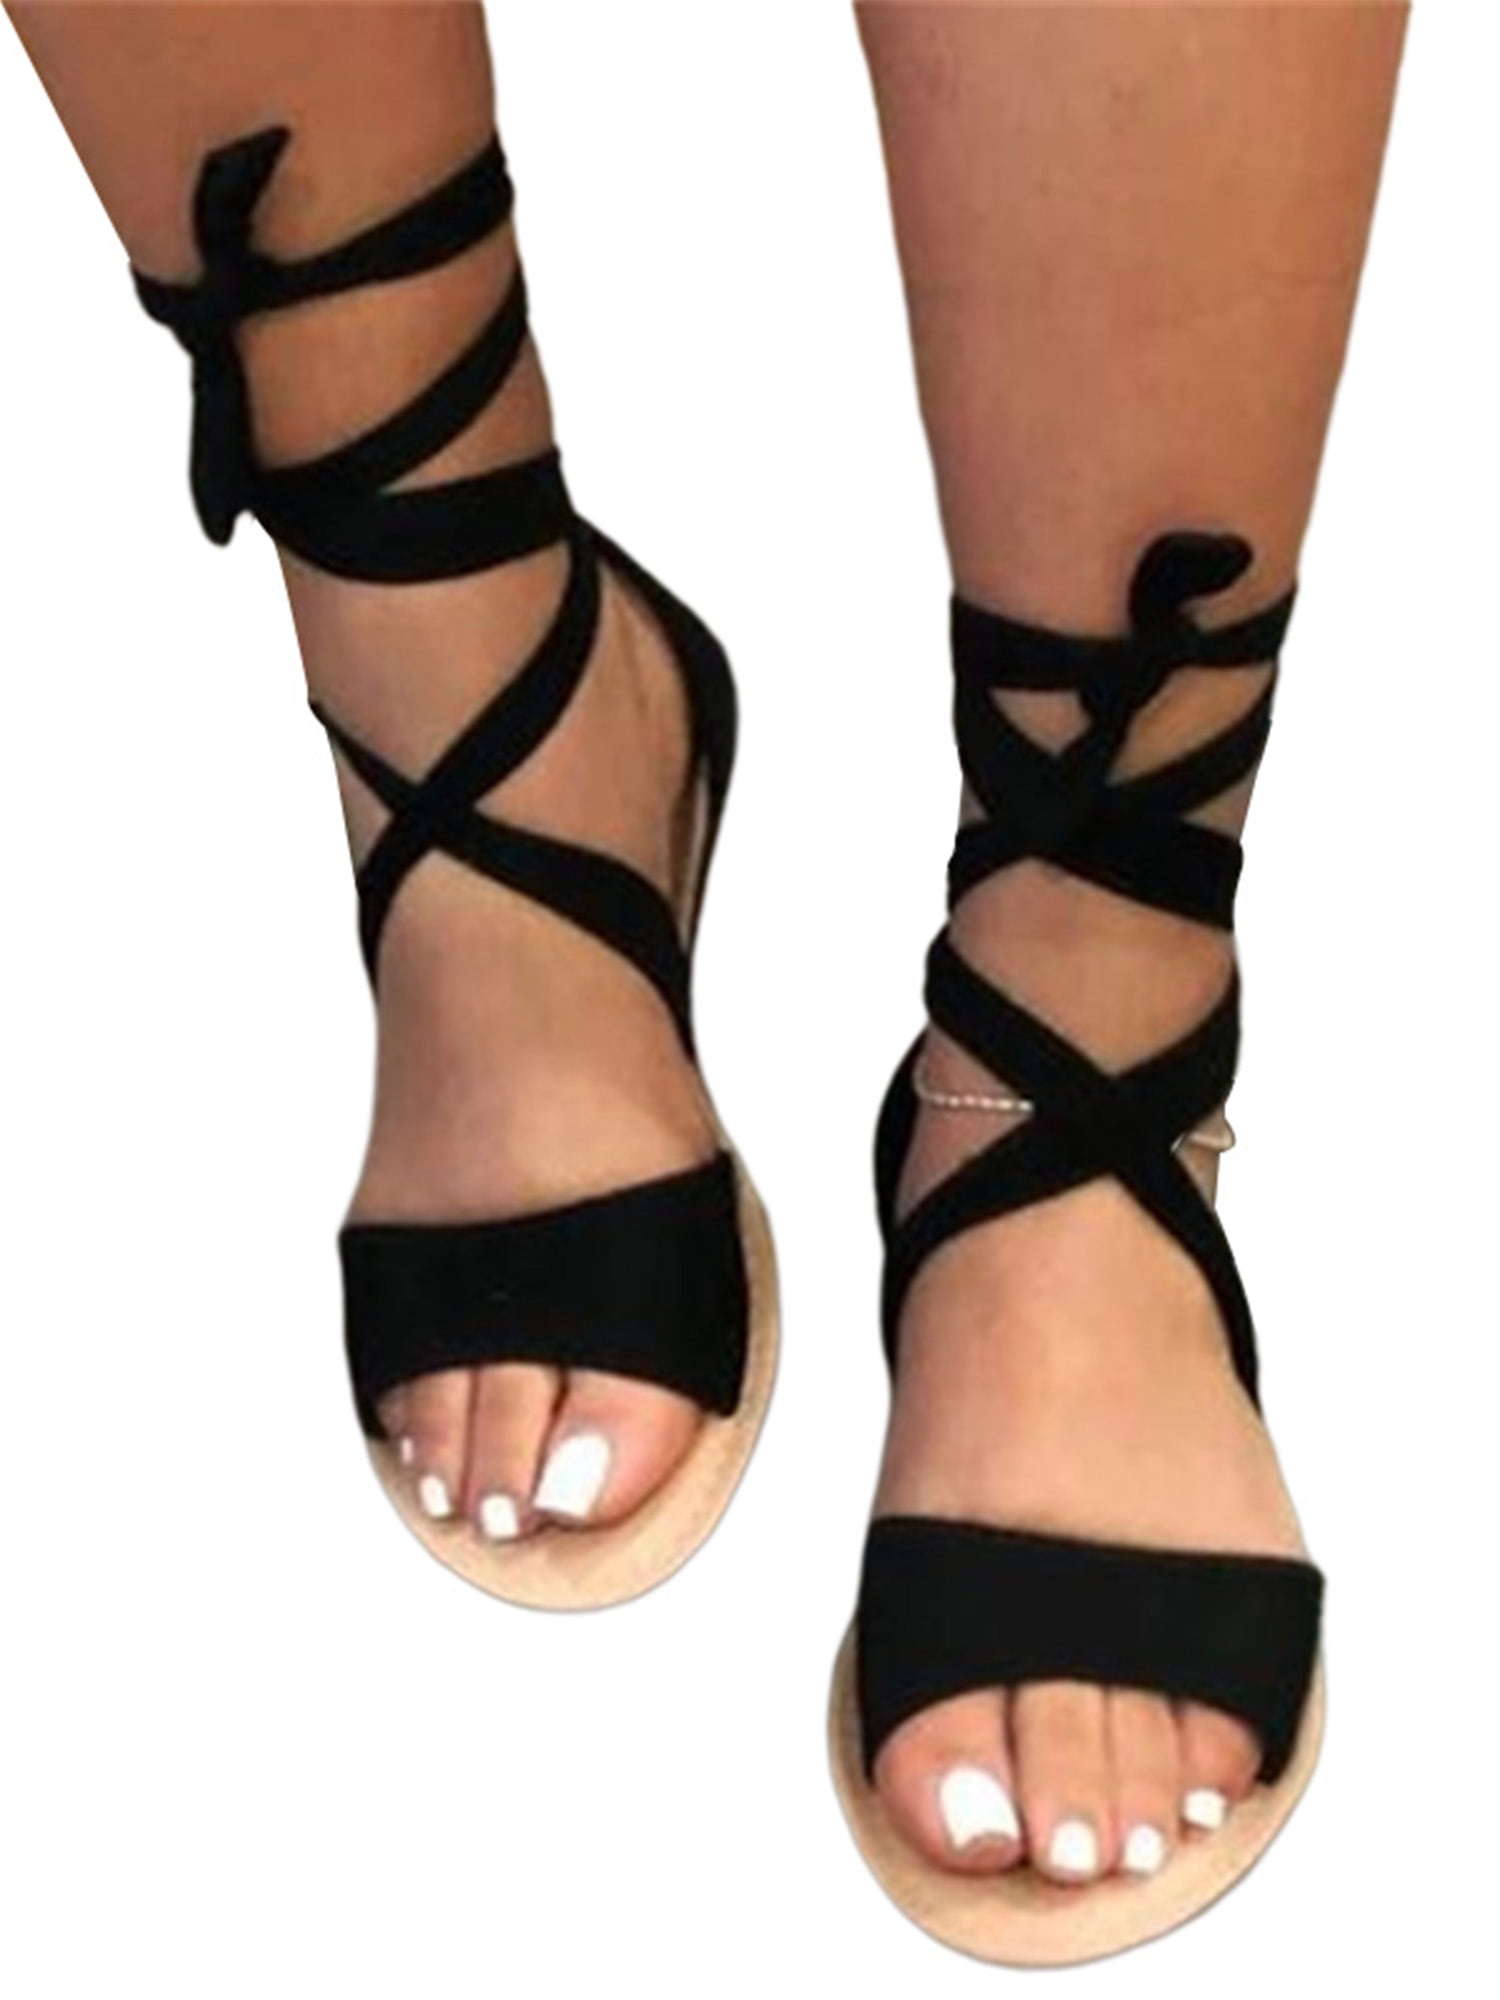 Womens Gladiator Sandals Open Toe Lace Up Criss Cross High Heel Strappy Stiletto Dress Shoes 